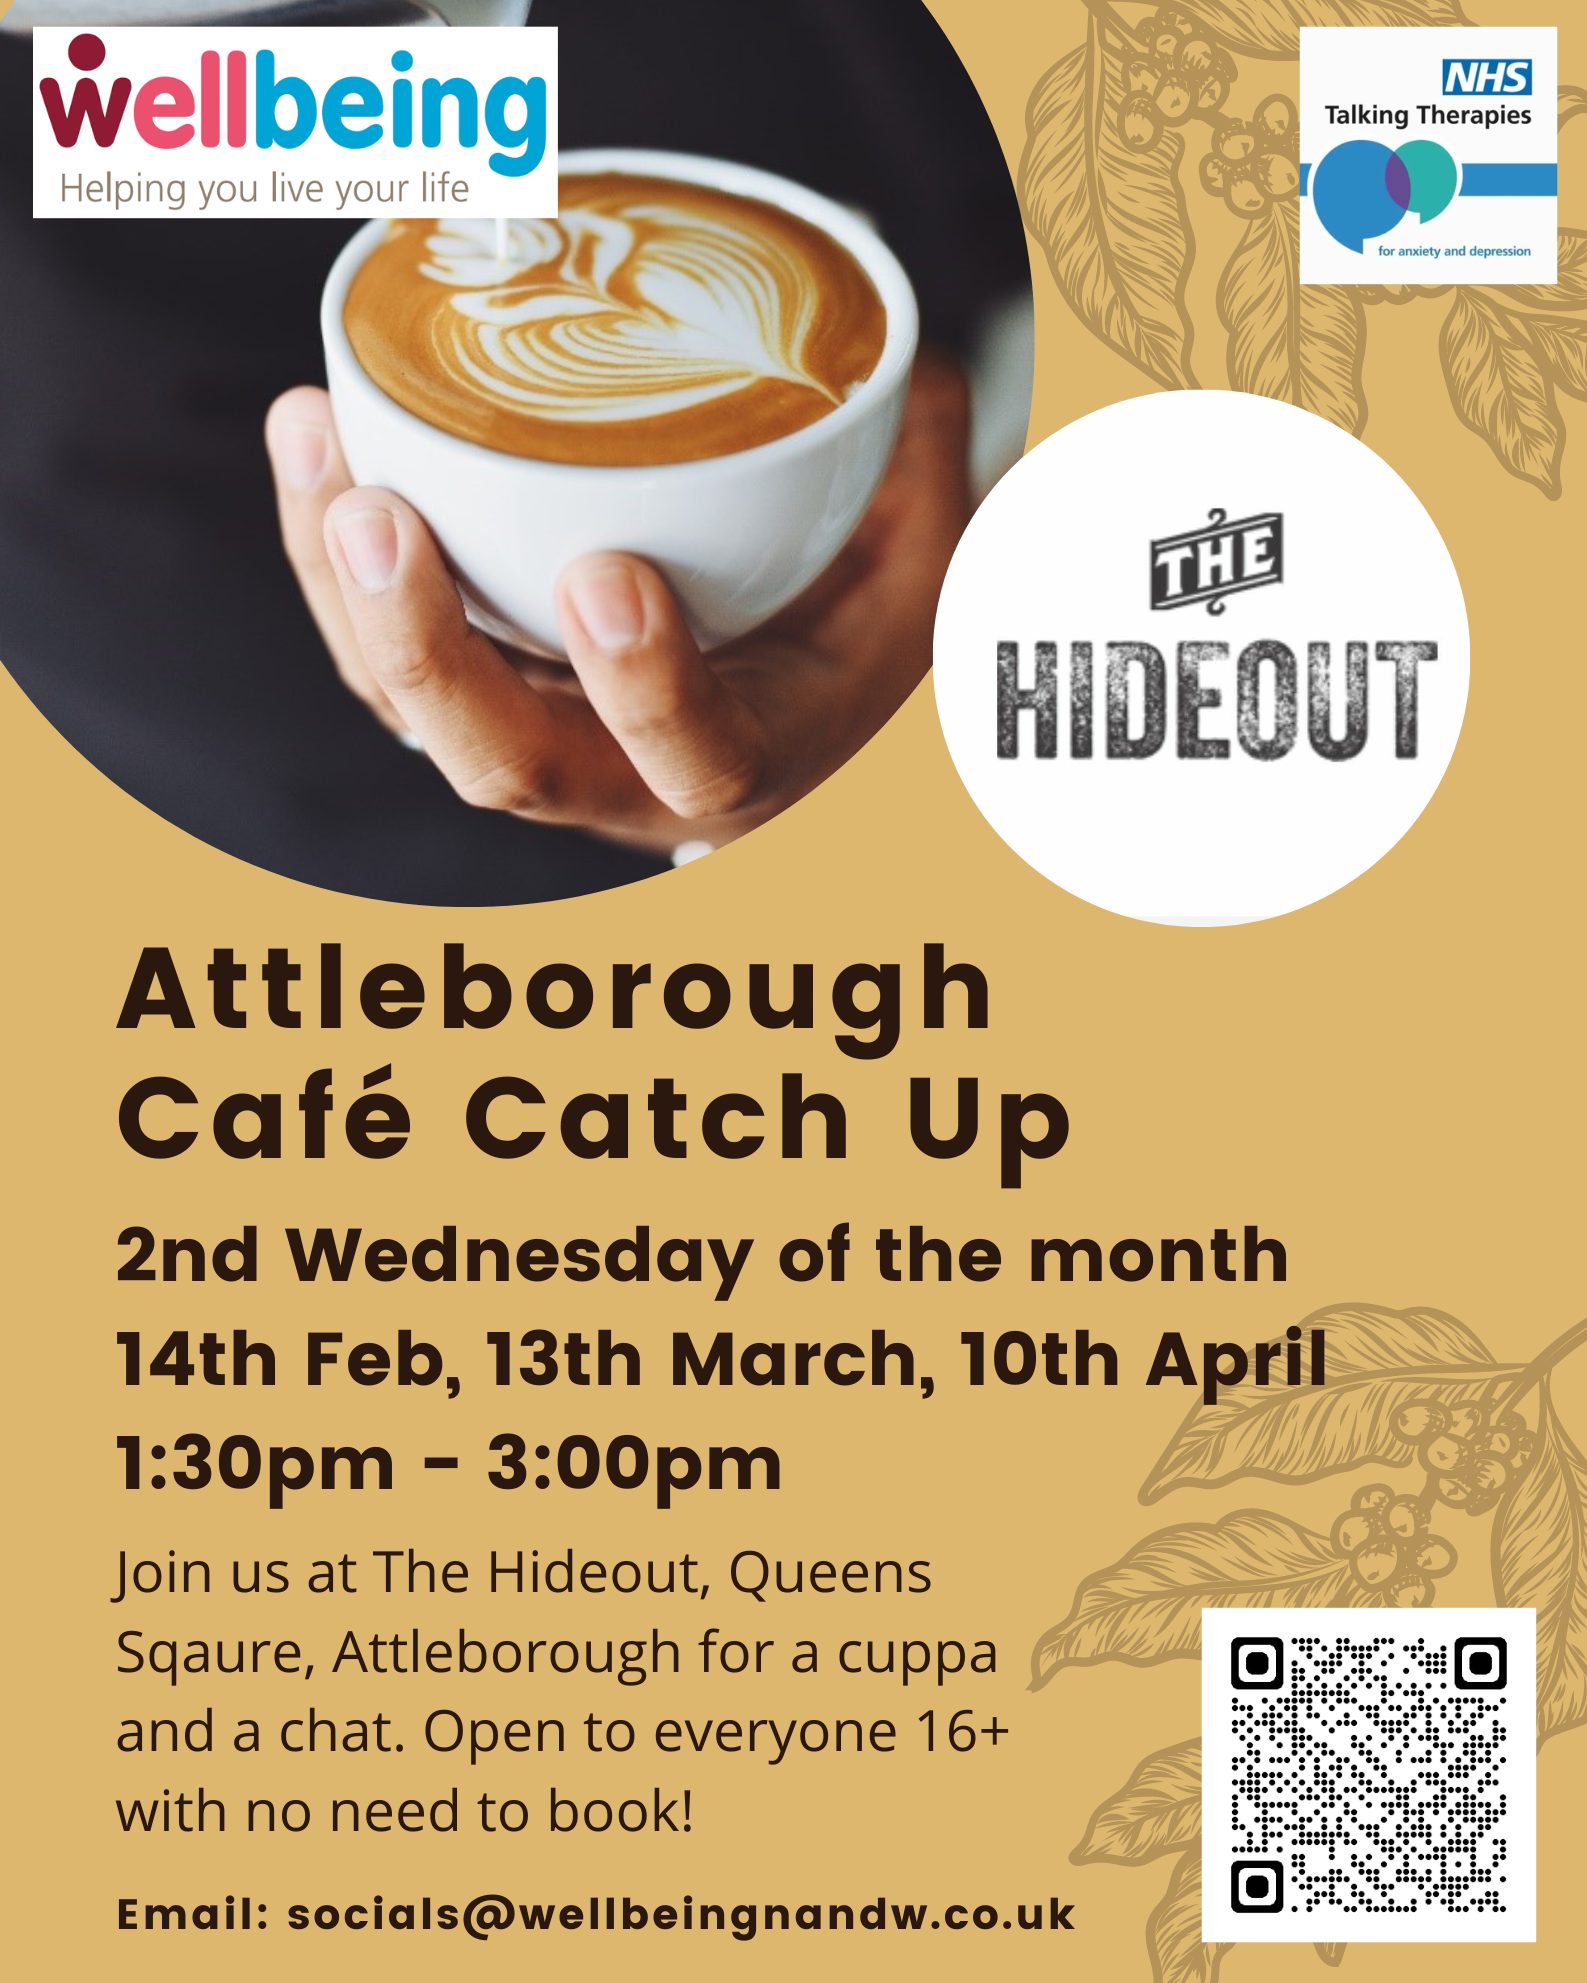 Wellbeing Café Catch-Up – The Hideout, Attleborough, 13th March